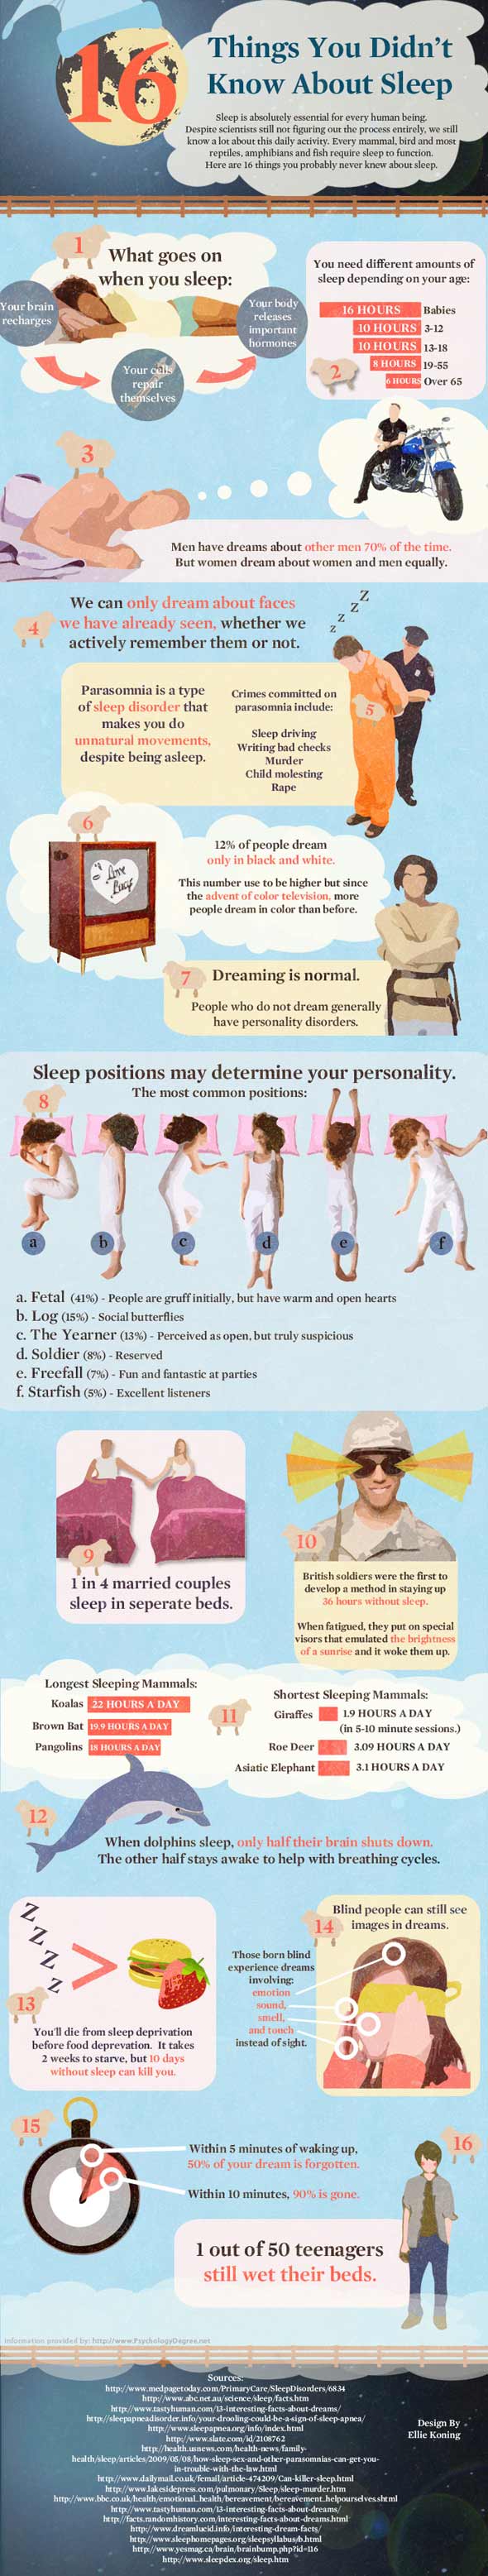 sleep graphic 590ds100510 1286284345 Amazing Facts You Didnt Know About Sleep